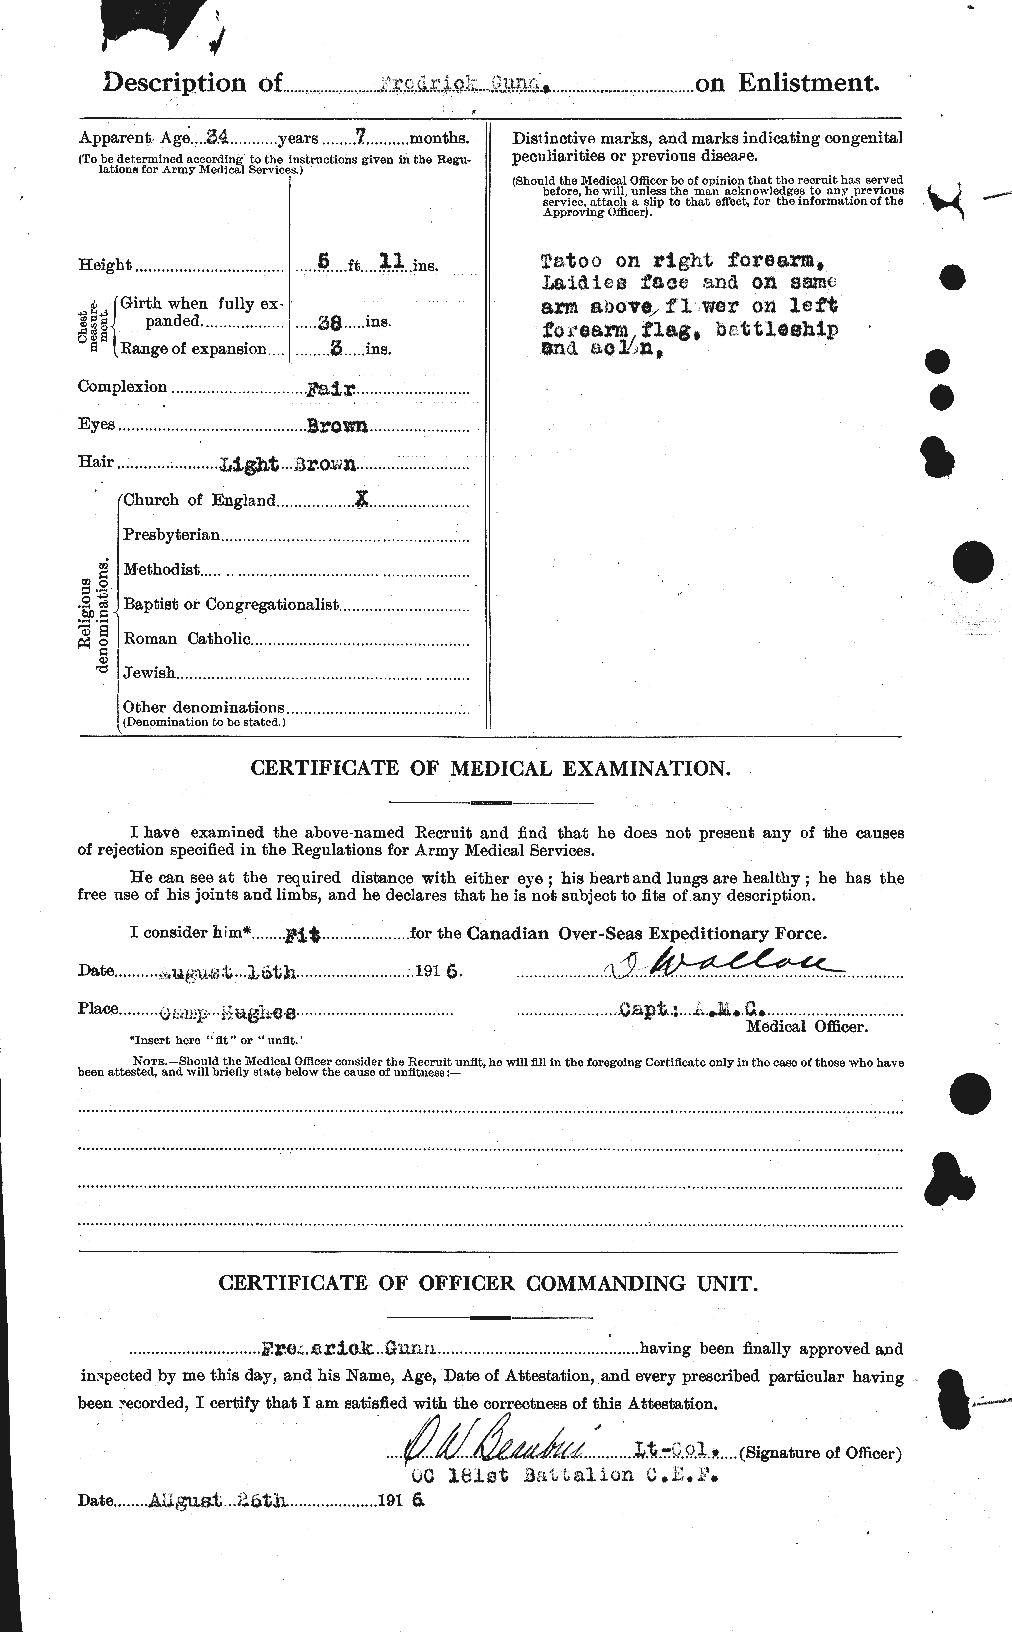 Personnel Records of the First World War - CEF 369234b